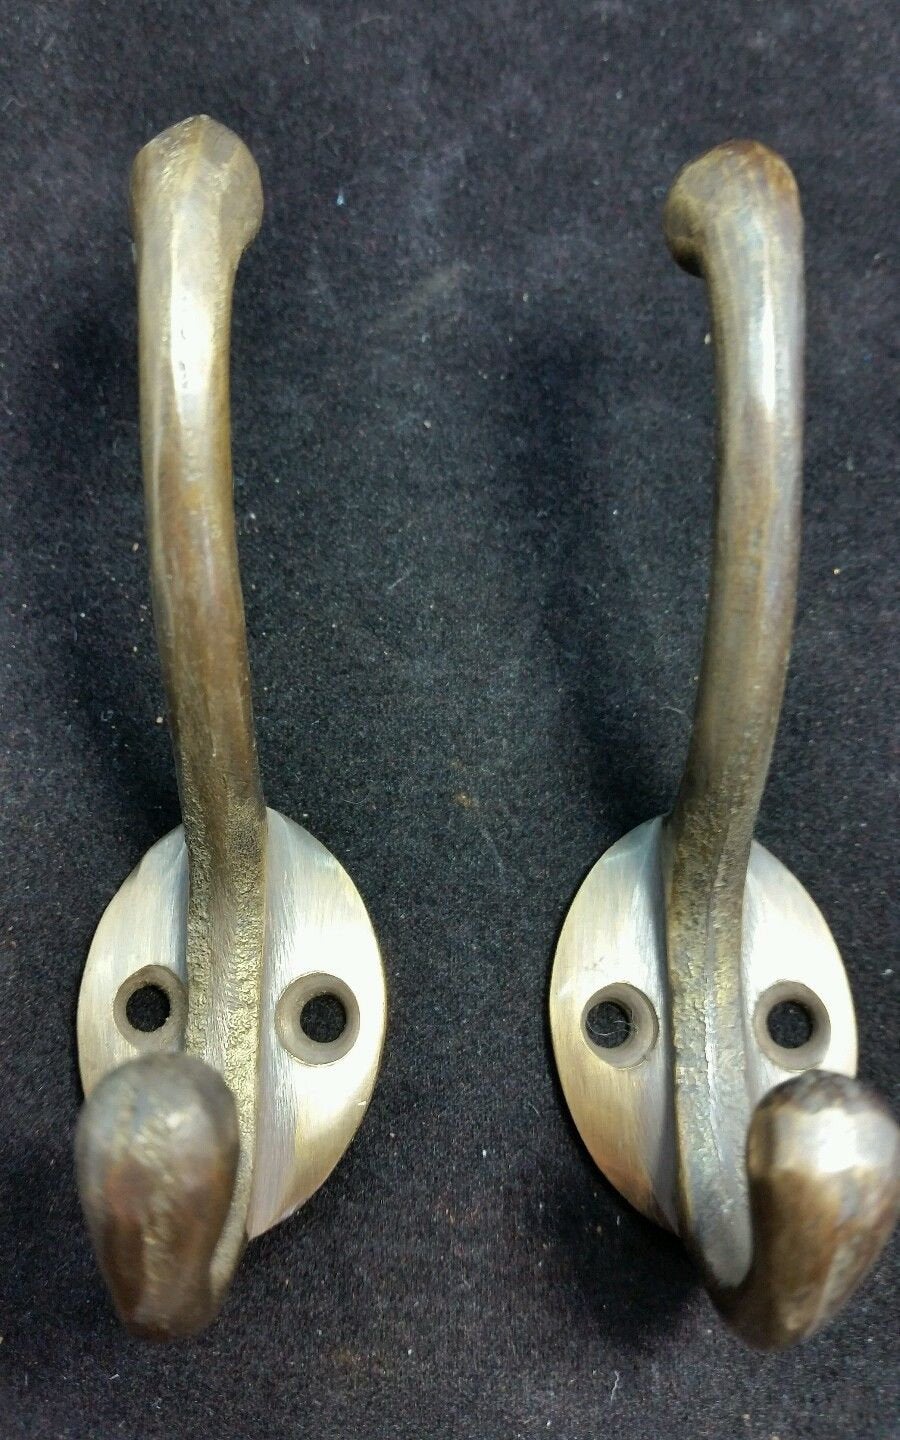 2 Solid Antique Brass Double Coat Hooks w. Oval Backplate 3" x 2" #C9